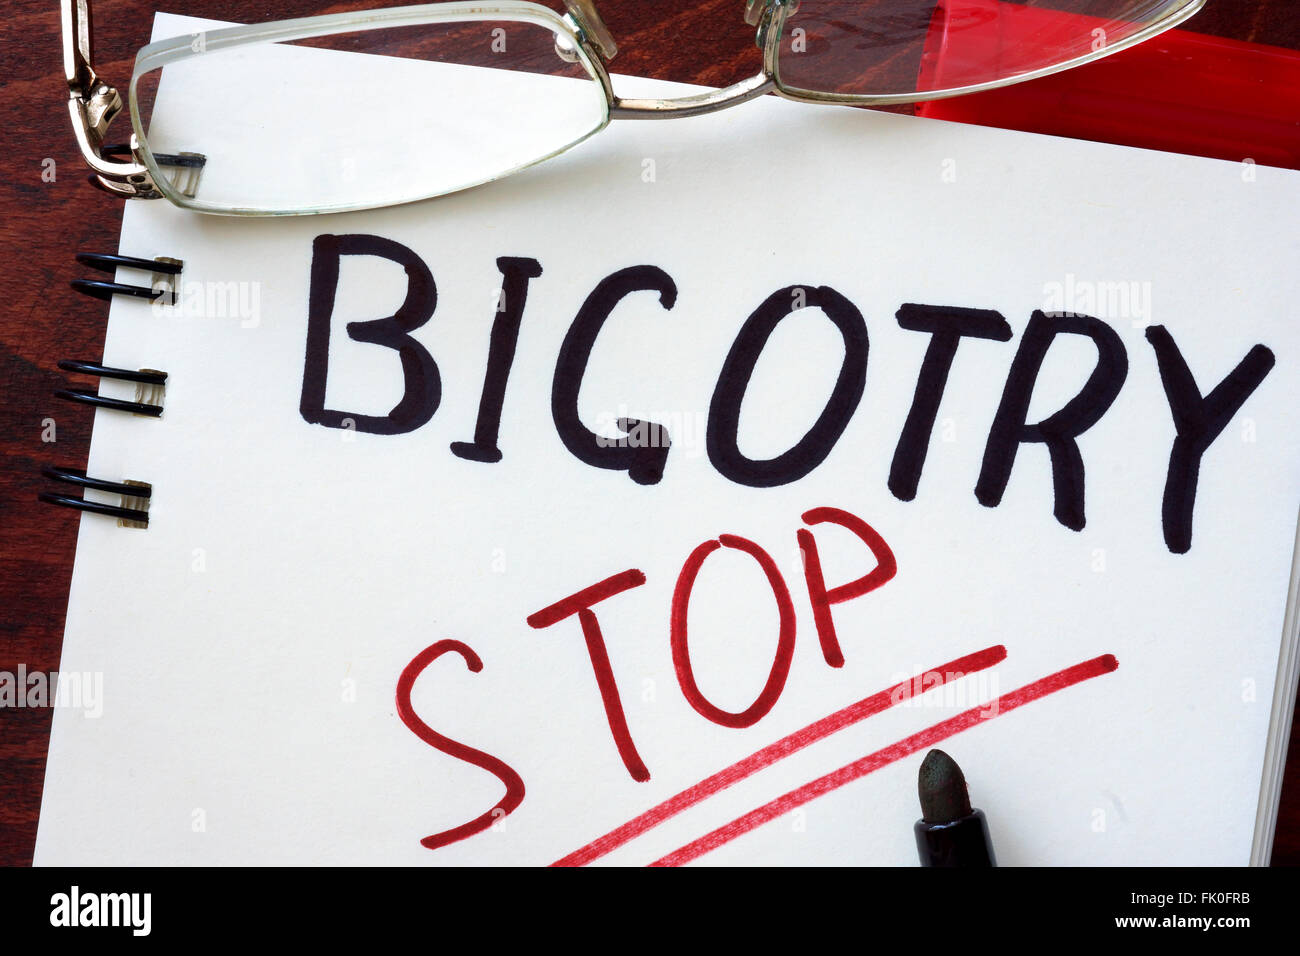 Stop Bigotry concept  written in a notebook on a wooden table. Stock Photo